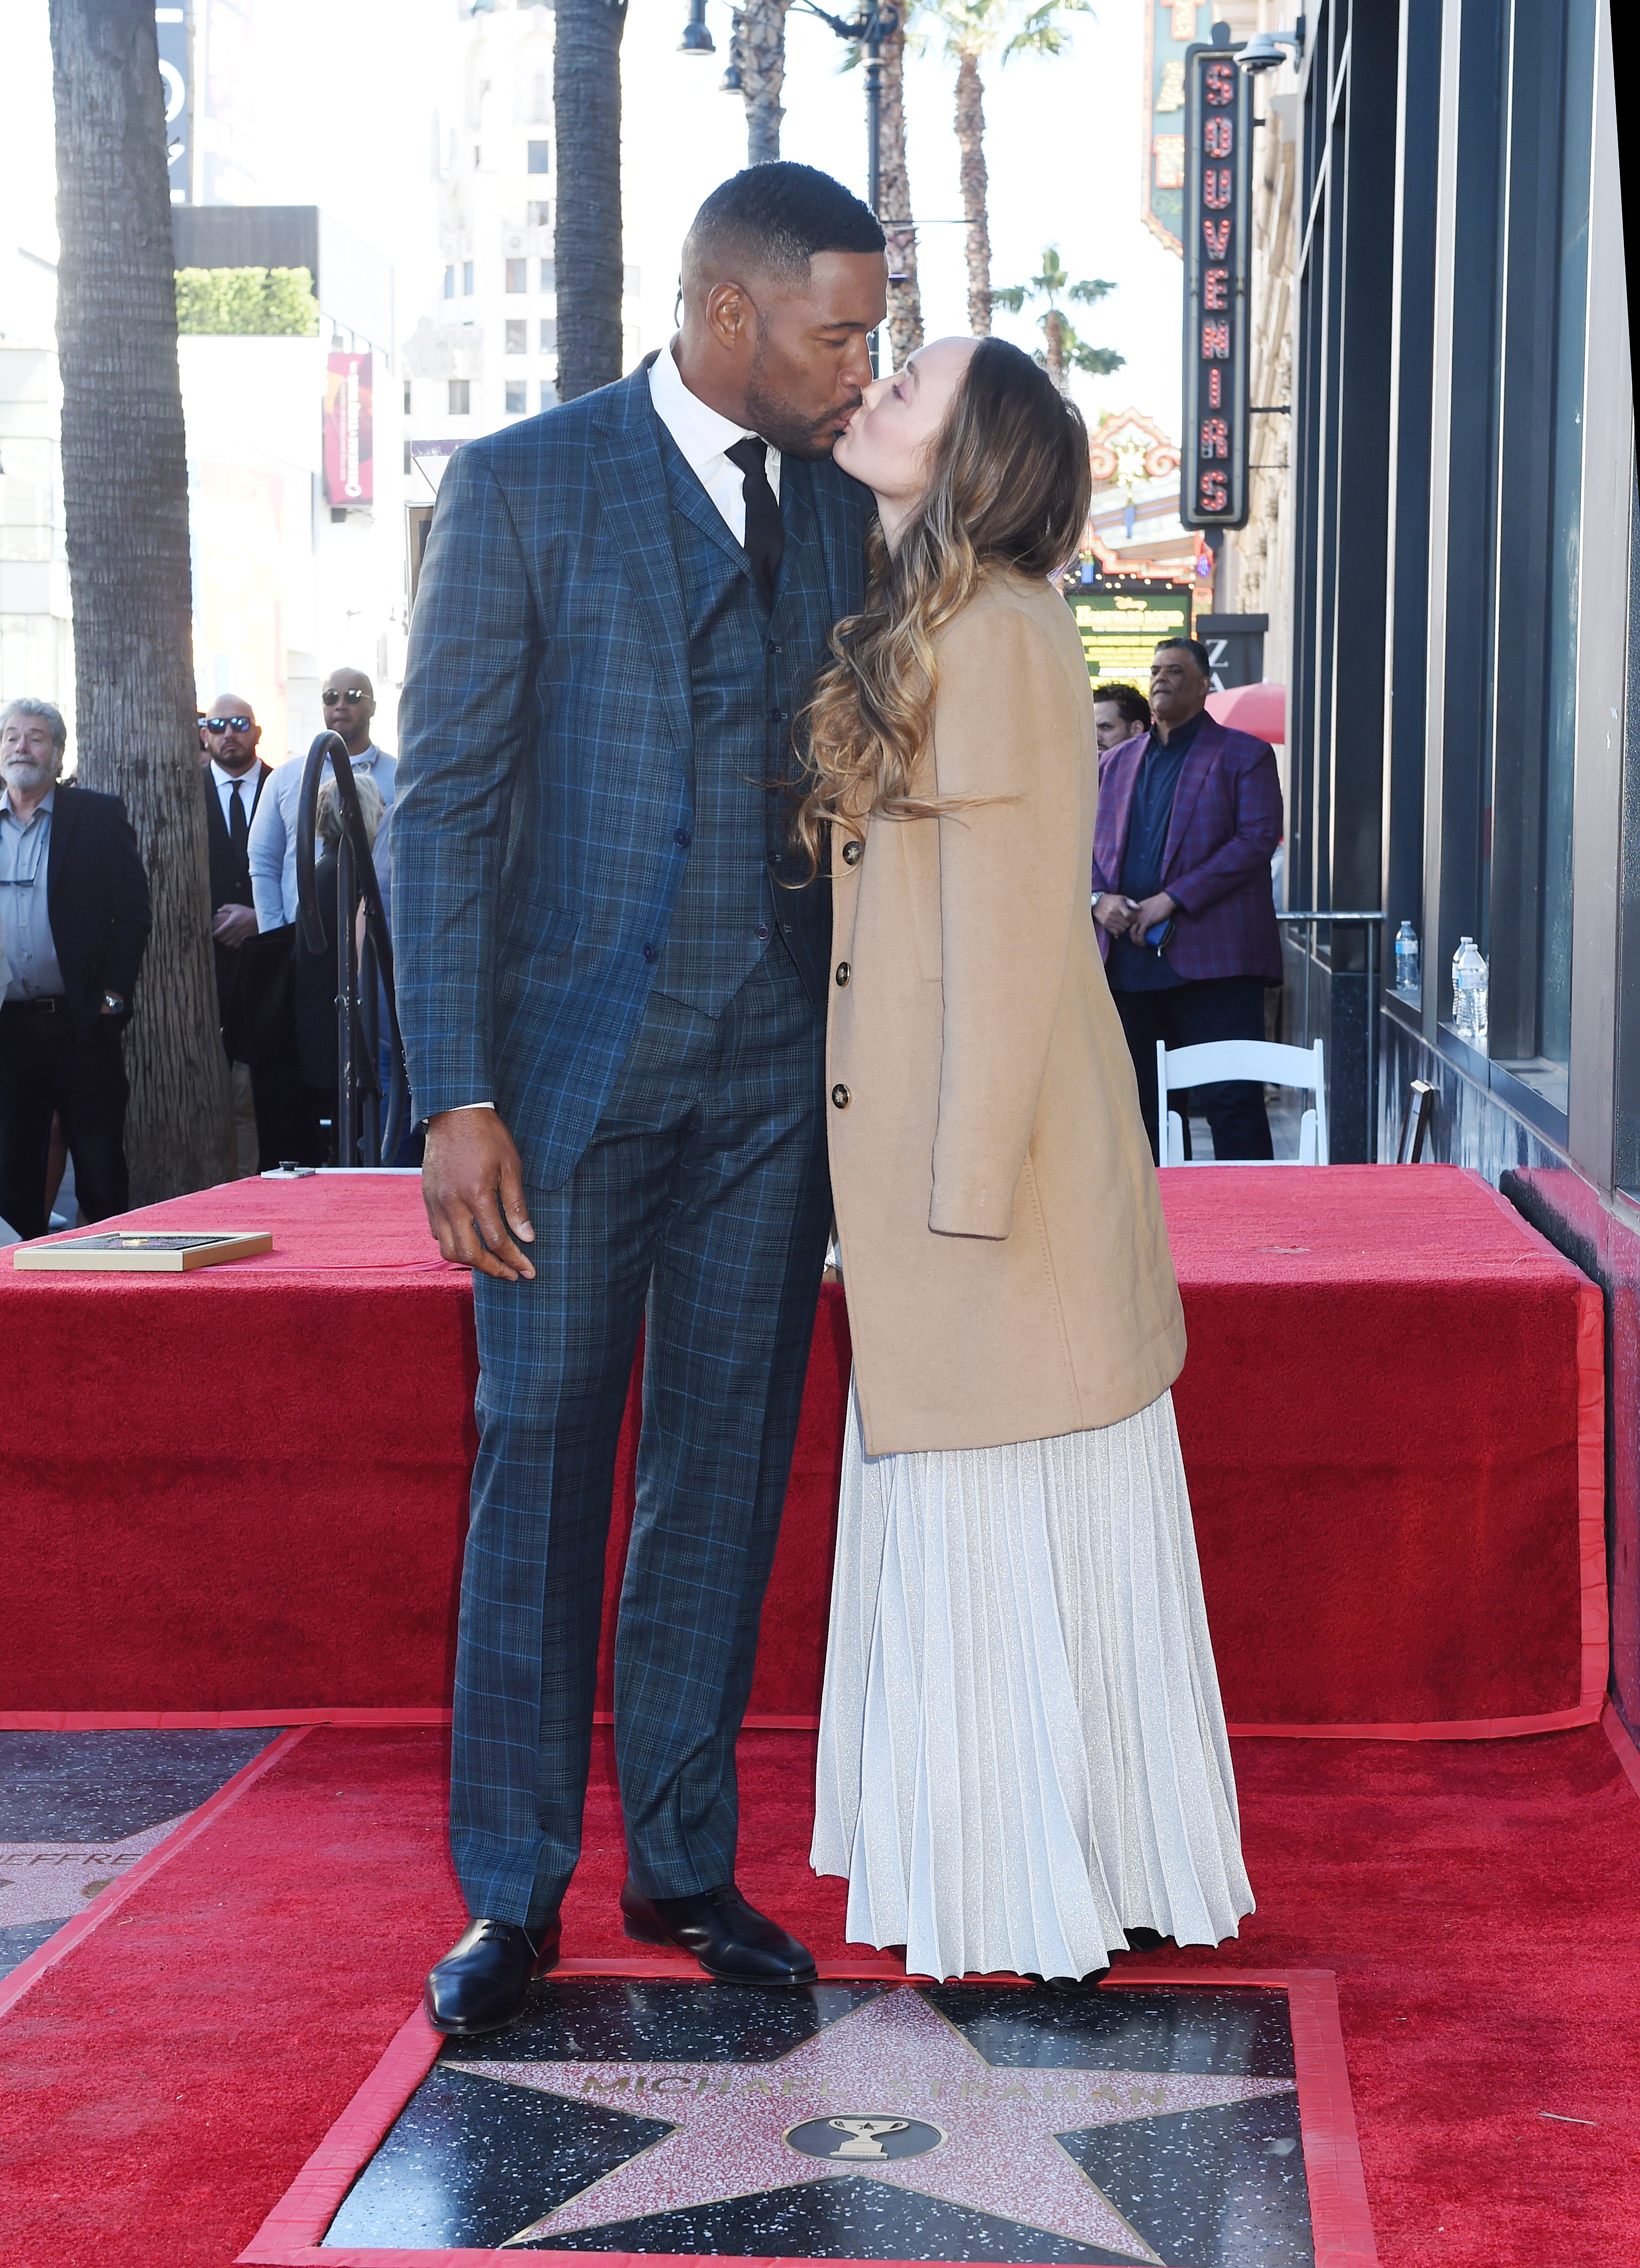 Michael Strahan kisses Kayla Quick during his first Sports Entertainment star ceremony on the Hollywood Walk of Fame in Los Angeles on January 23, 2023. | Source: Getty Images